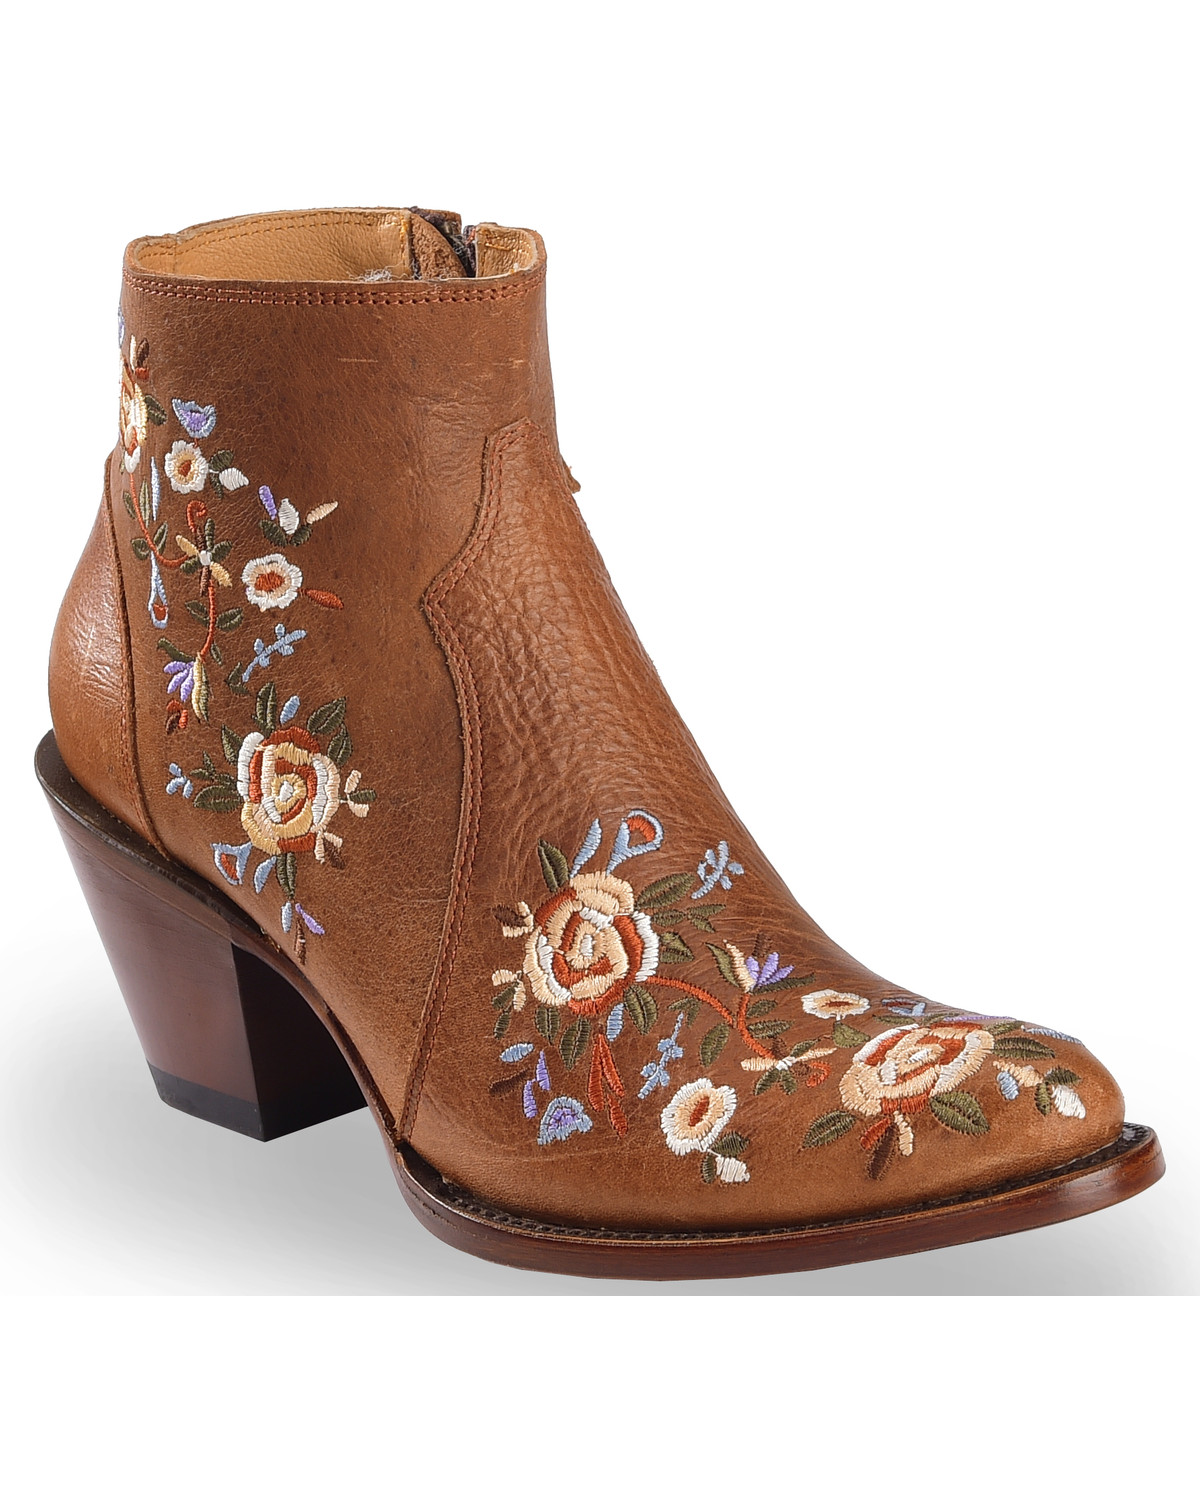 Shyanne Women's Millie Floral Embroidered Booties - Round Toe